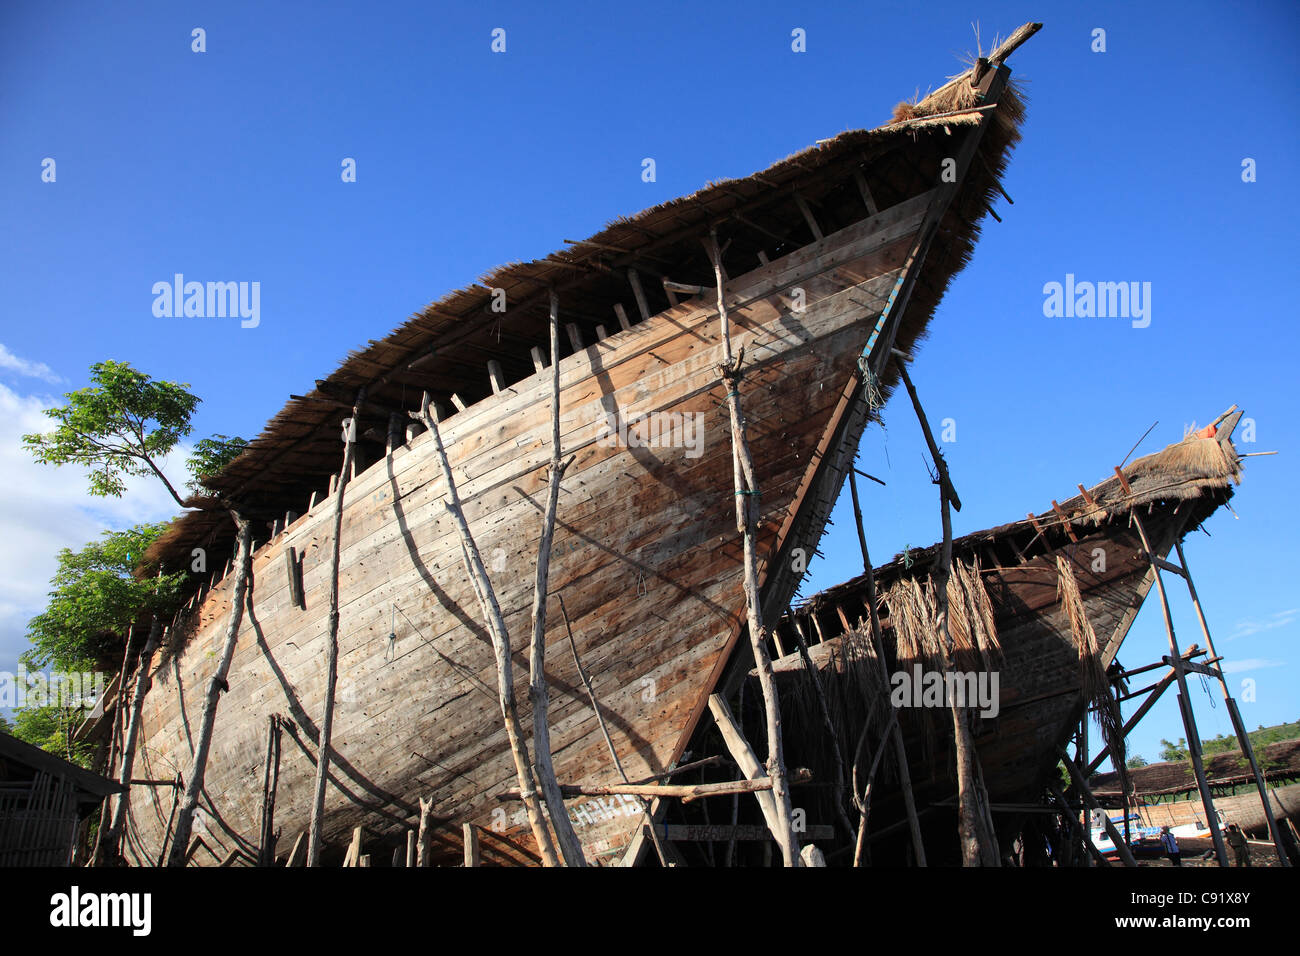 Boat building is one of the major occupations of the coastal communities of Sumbawa island. Wooden boats are constructed on the Stock Photo